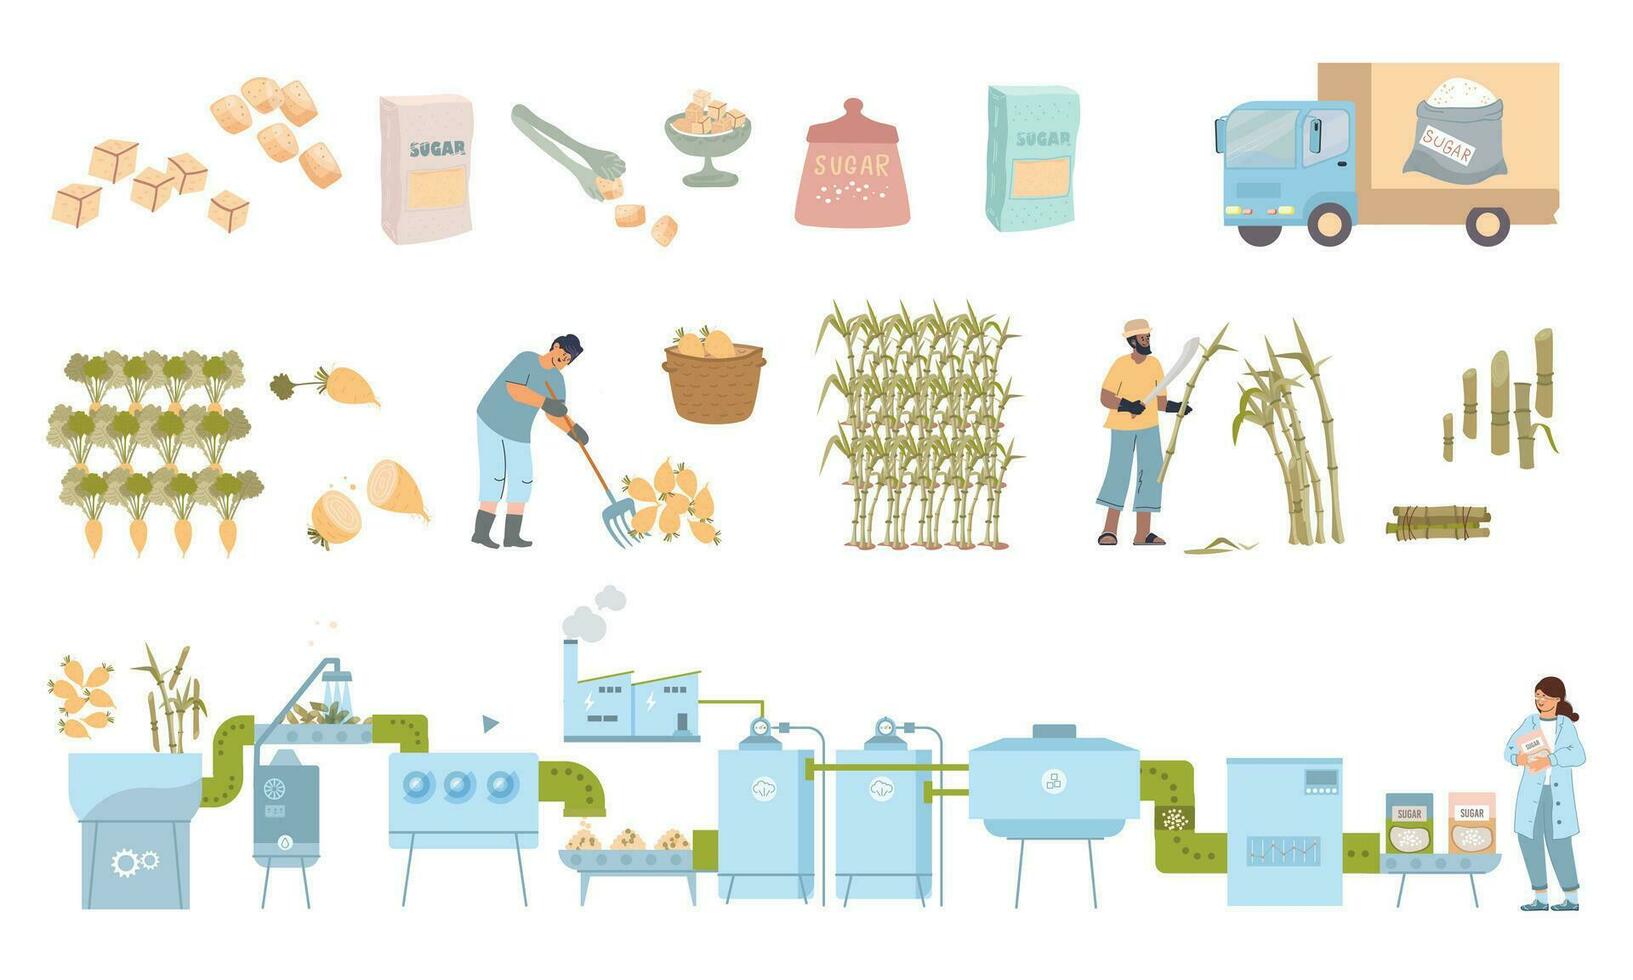 Sugar Production Icons Collection vector